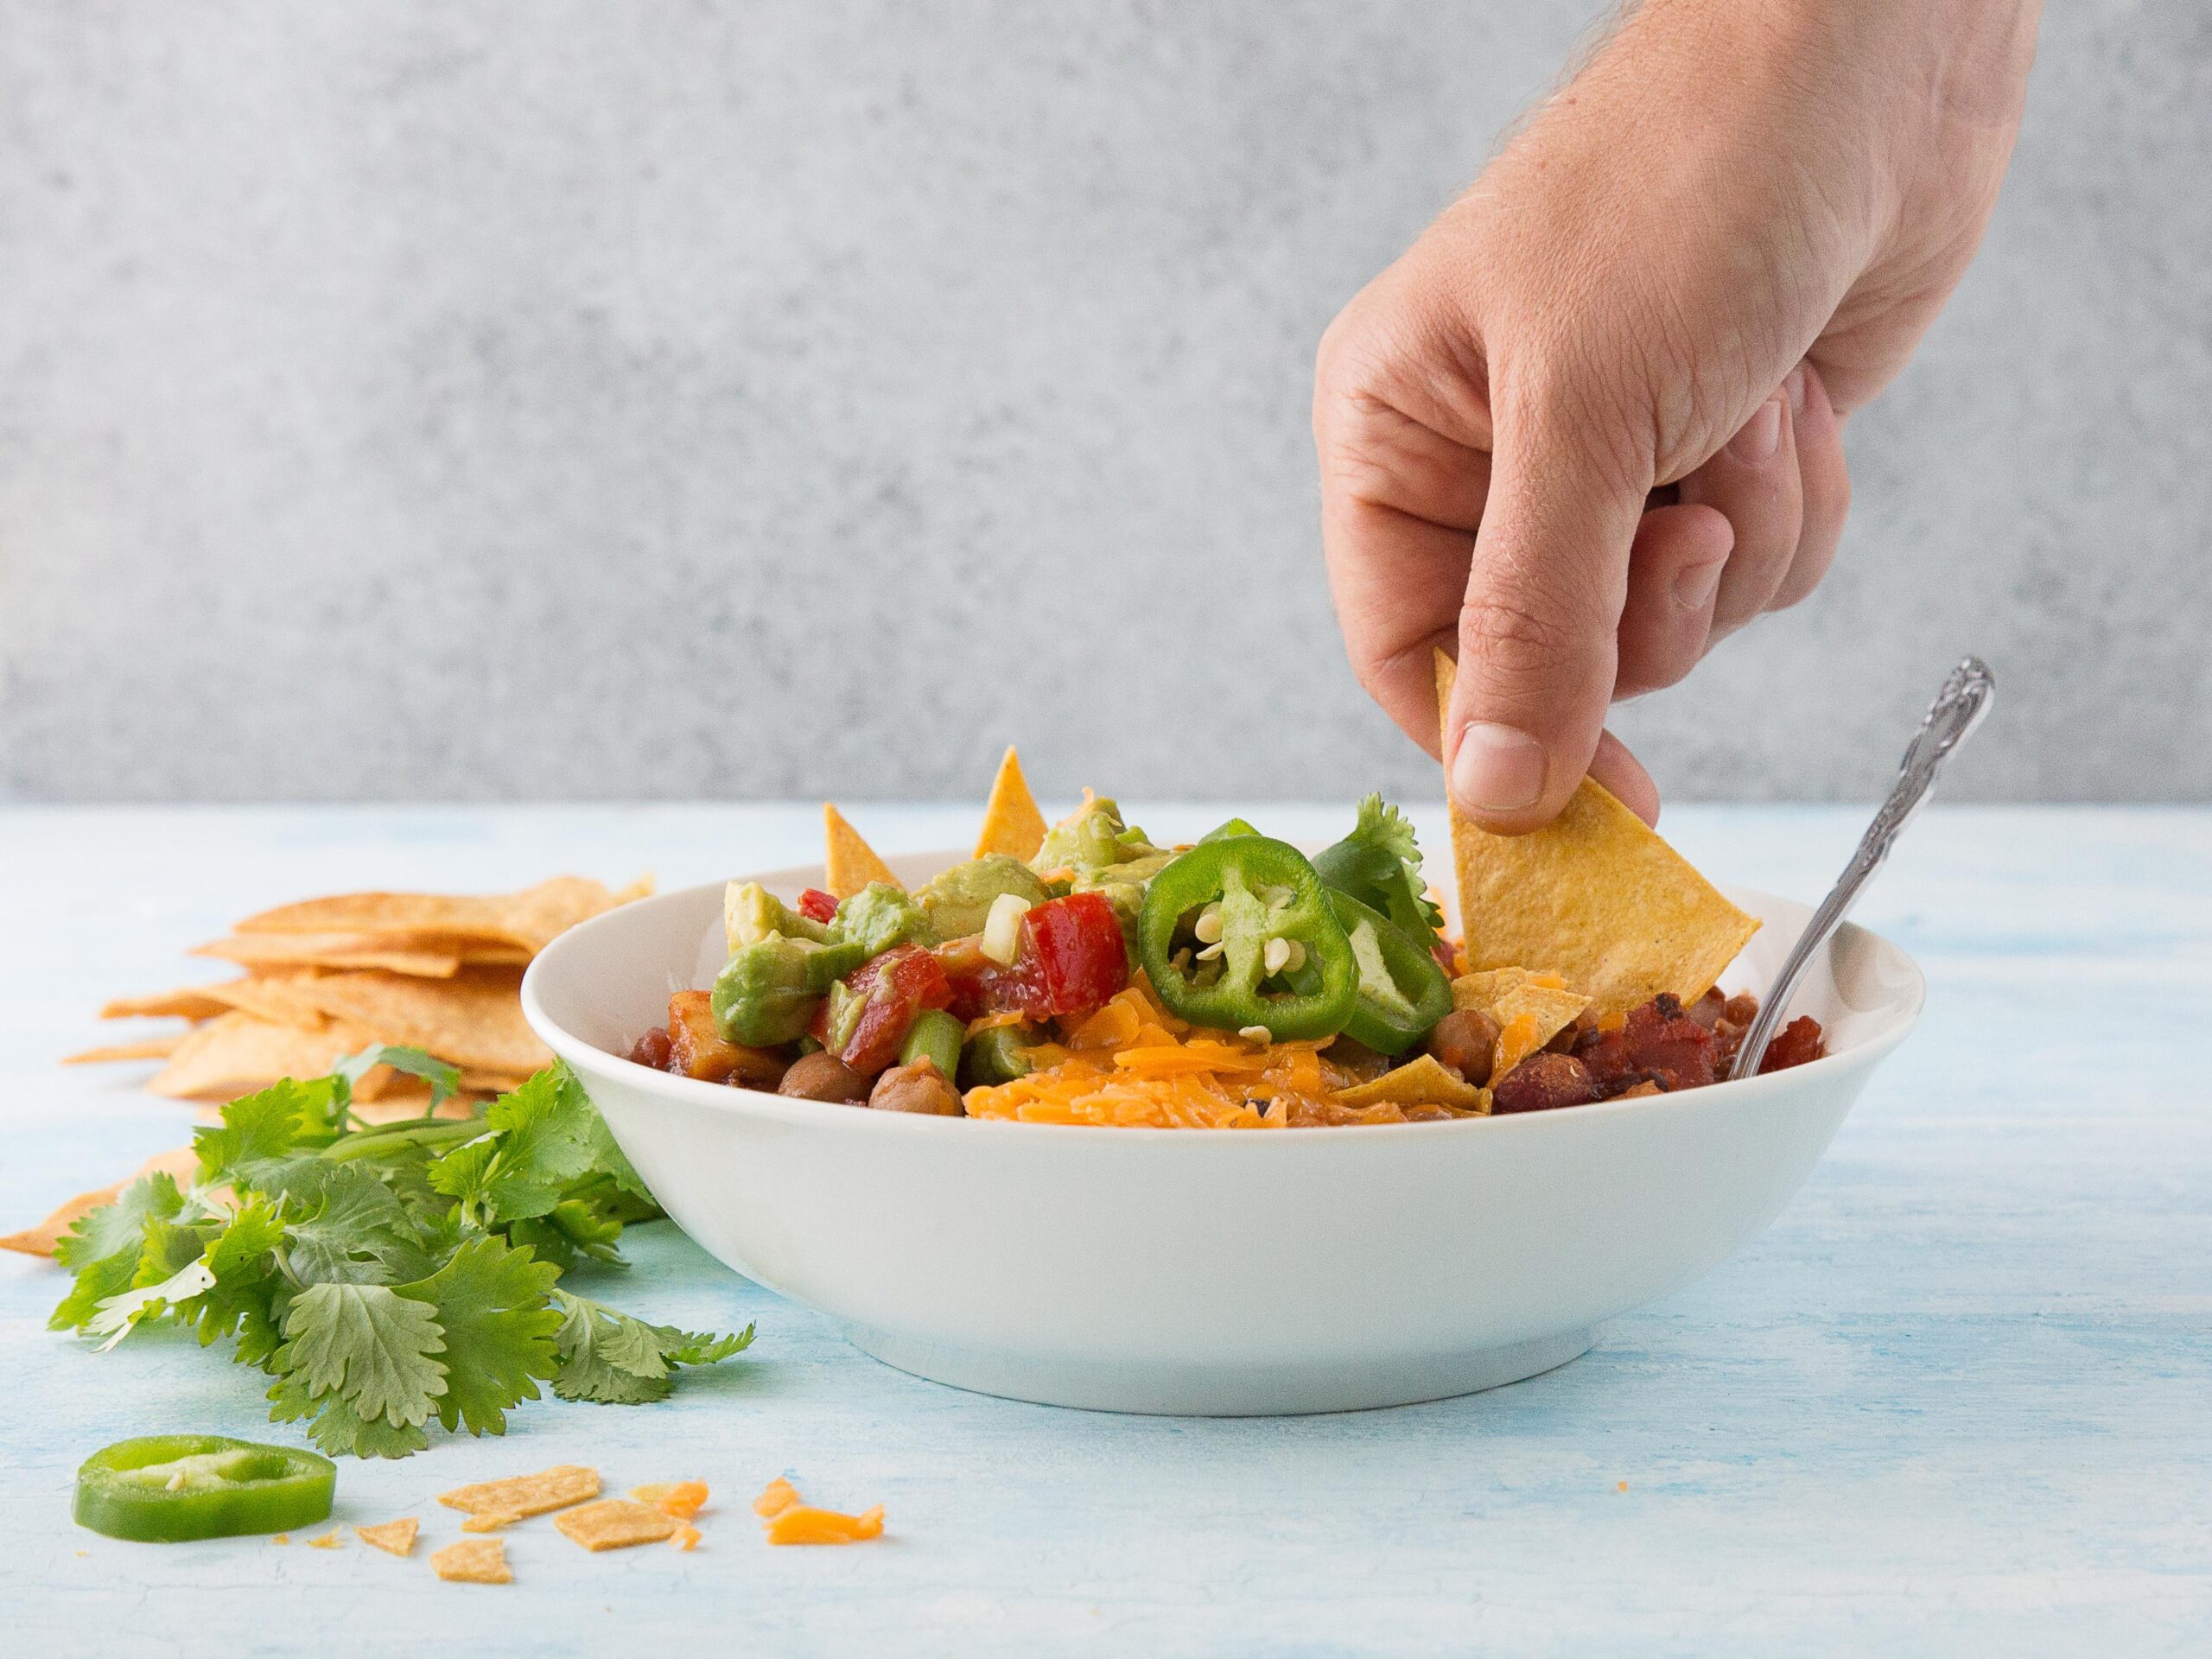  Our 3 Bean Vegetarian Chili is packed with protein and flavorful spices!